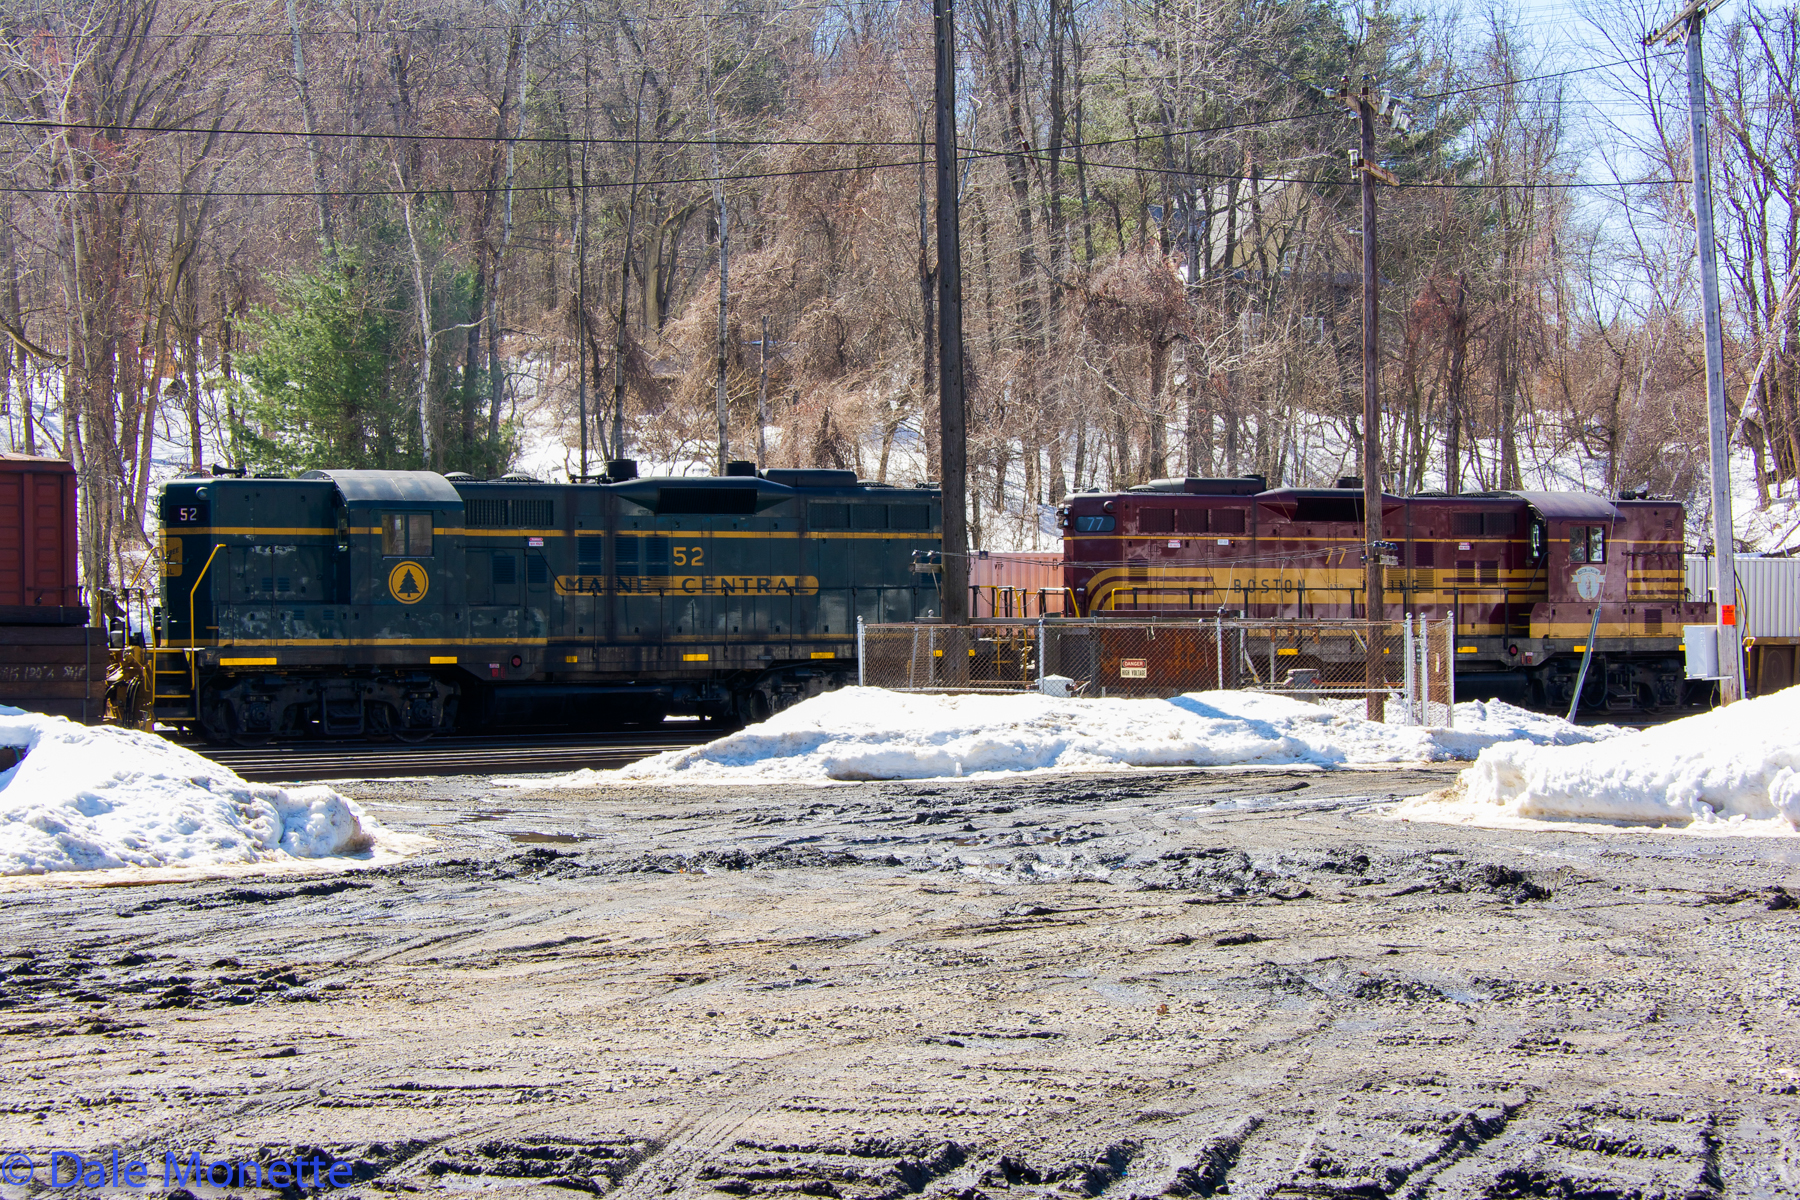   Here's both Alco's lashed together working the East Deerfield Pan Am train yard putting a train together. &nbsp;3/12/15  